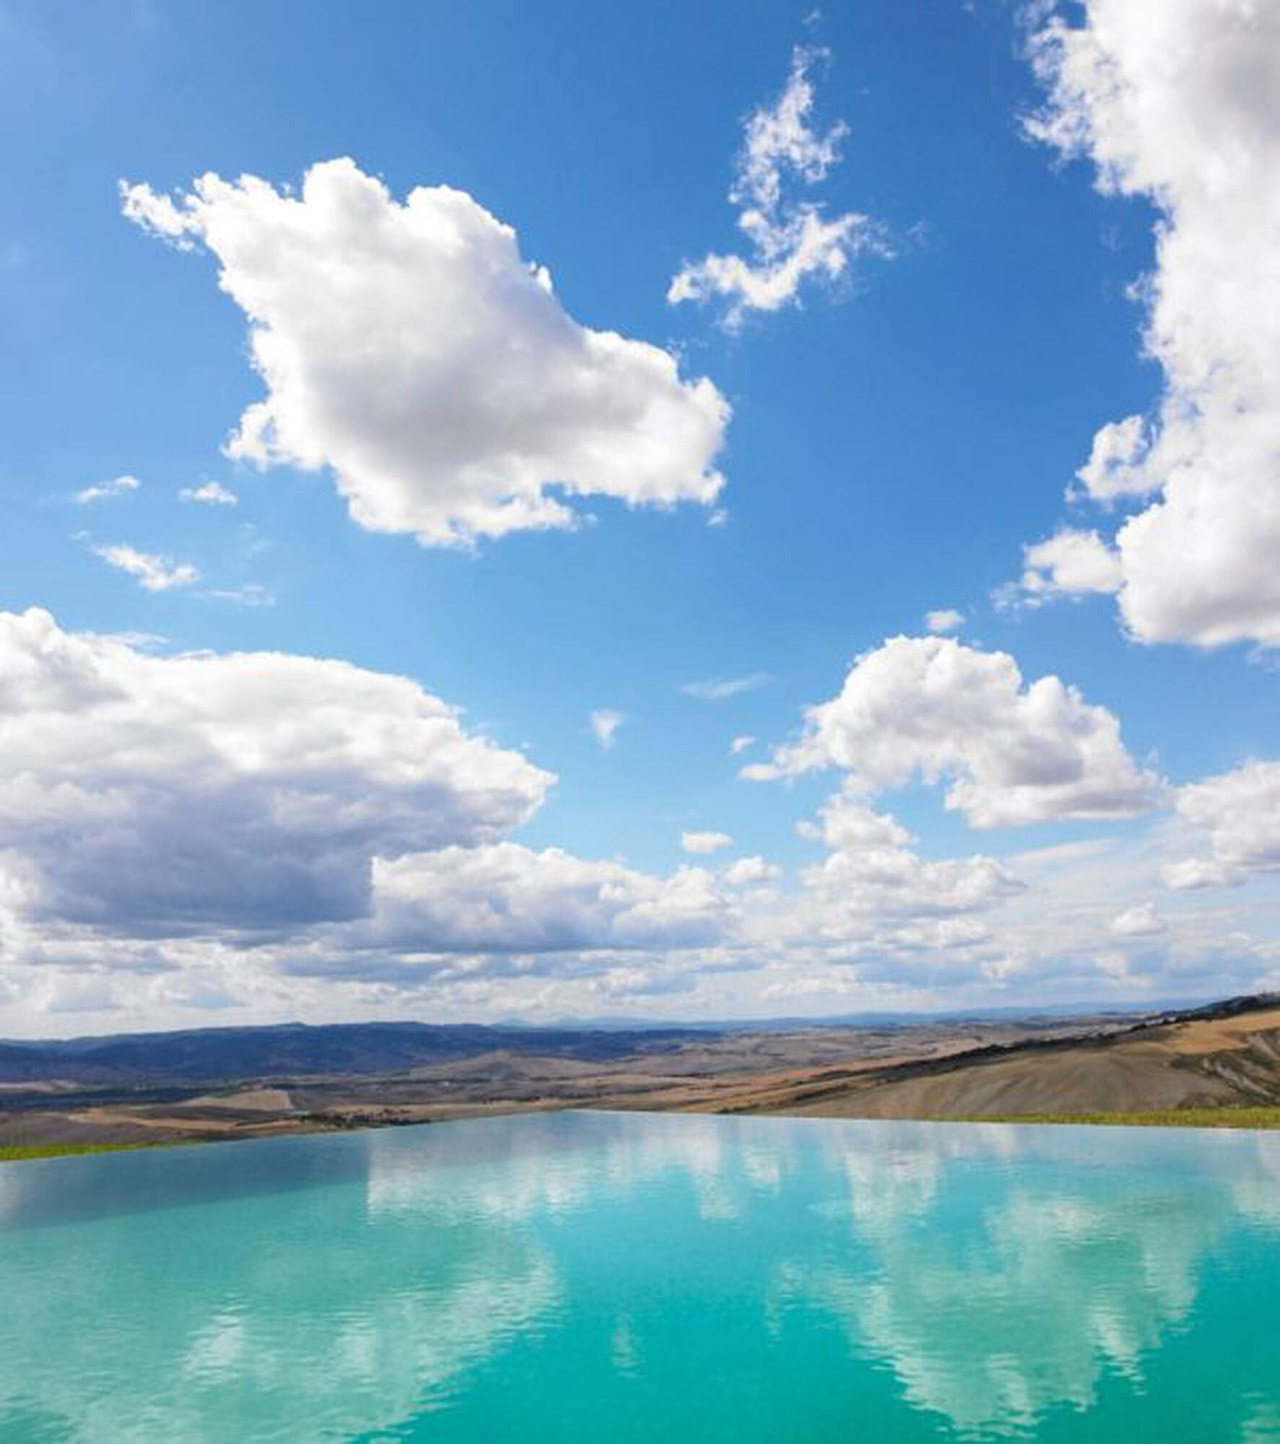 scenic image of blue skies with fluffy clouds over an aqua blue lake.